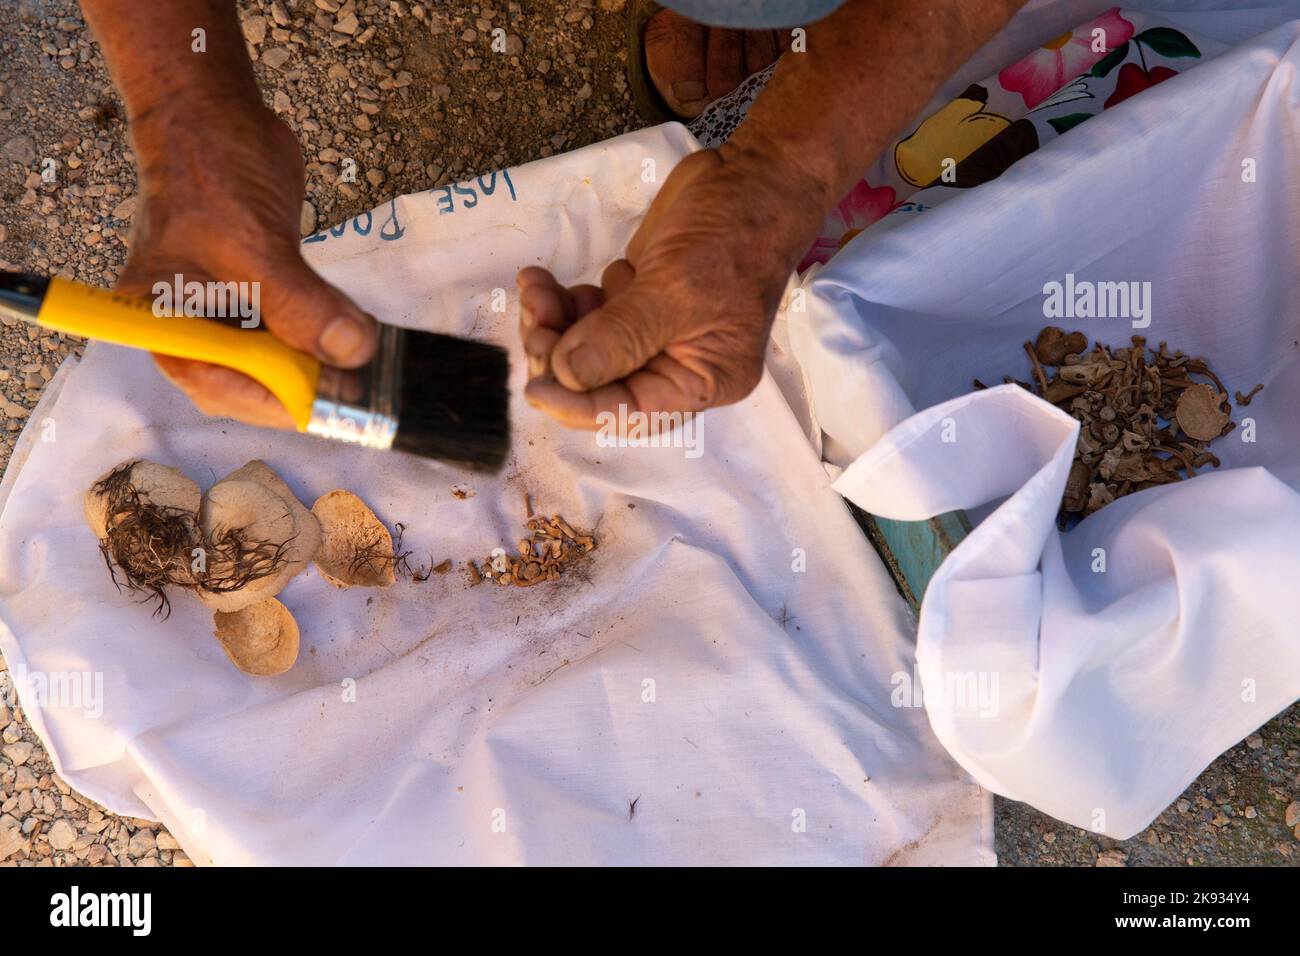 José Alfredo Yam Vargas cleans the bones and skull of his grandson who died 9 years ago at age 8 months, at the cemetery of Pomuch, Campeche state, Mexico on October 22, 2022. Every year in preparation for Hanal Pixán, the Mayan Day of the Dead celebration, members of the Pomuch community in southeastern Mexico extract bones from their niches and carefully clean them – an ancestral tradition seen as a gesture of love and a way to get closer to deceased family members. This ritual, which in Mayan is known as Choo Ba’ak, can be done for the first time when a person has been dead for three years. Stock Photo